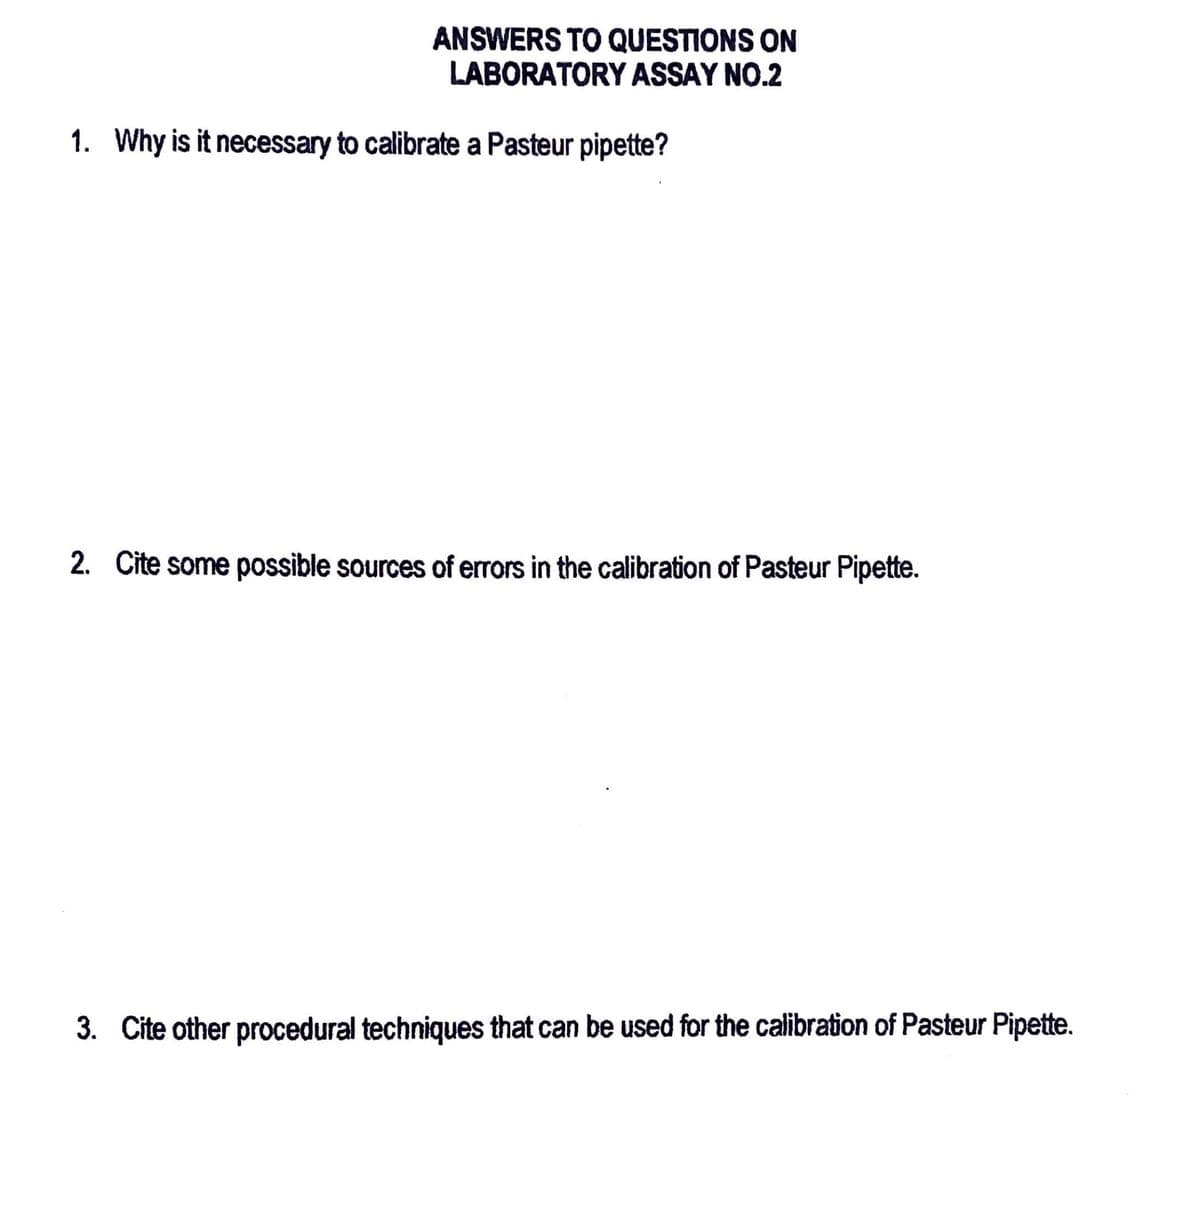 ANSWERS TO QUESTIONS ON
LABORATORY ASSAY NO.2
1. Why is it necessary to calibrate a Pasteur pipette?
2. Cite some possible sources of errors in the calibration of Pasteur Pipette.
3. Cite other procedural techniques that can be used for the calibration of Pasteur Pipette.